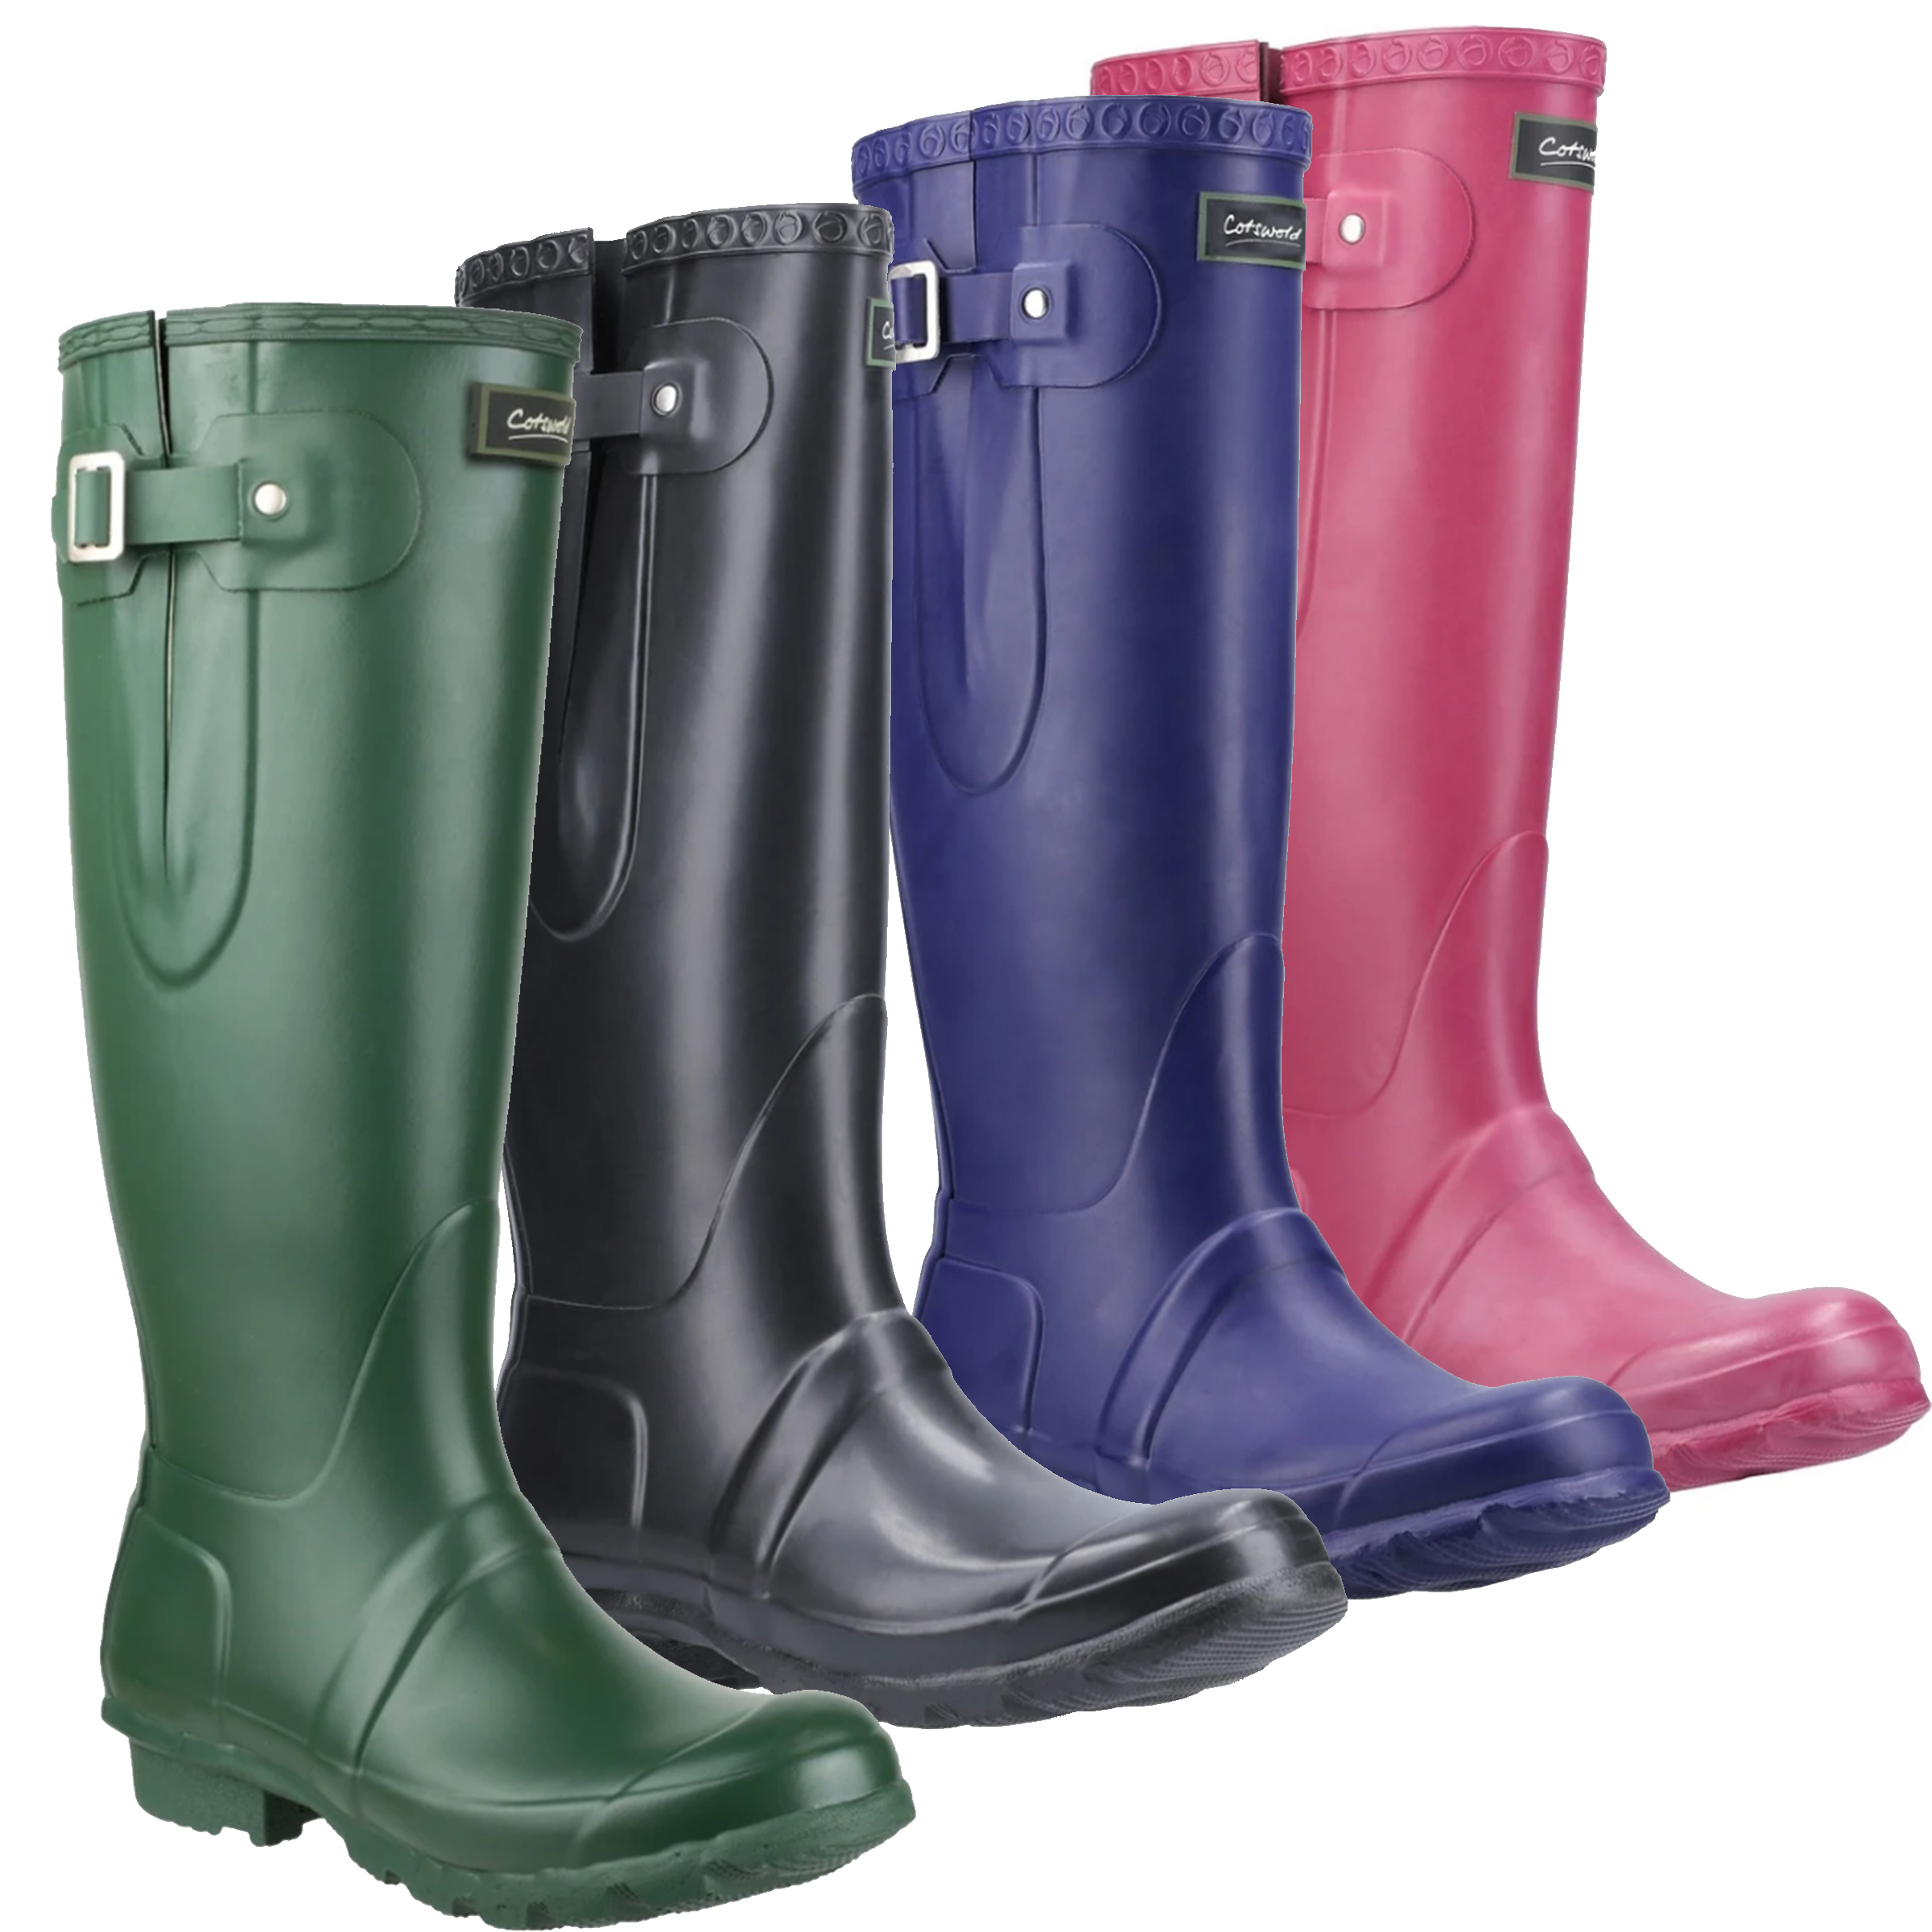 Mens/Womens Cotswold Windsor Tall Rubber Wellington Wellie Boots Sizes ...